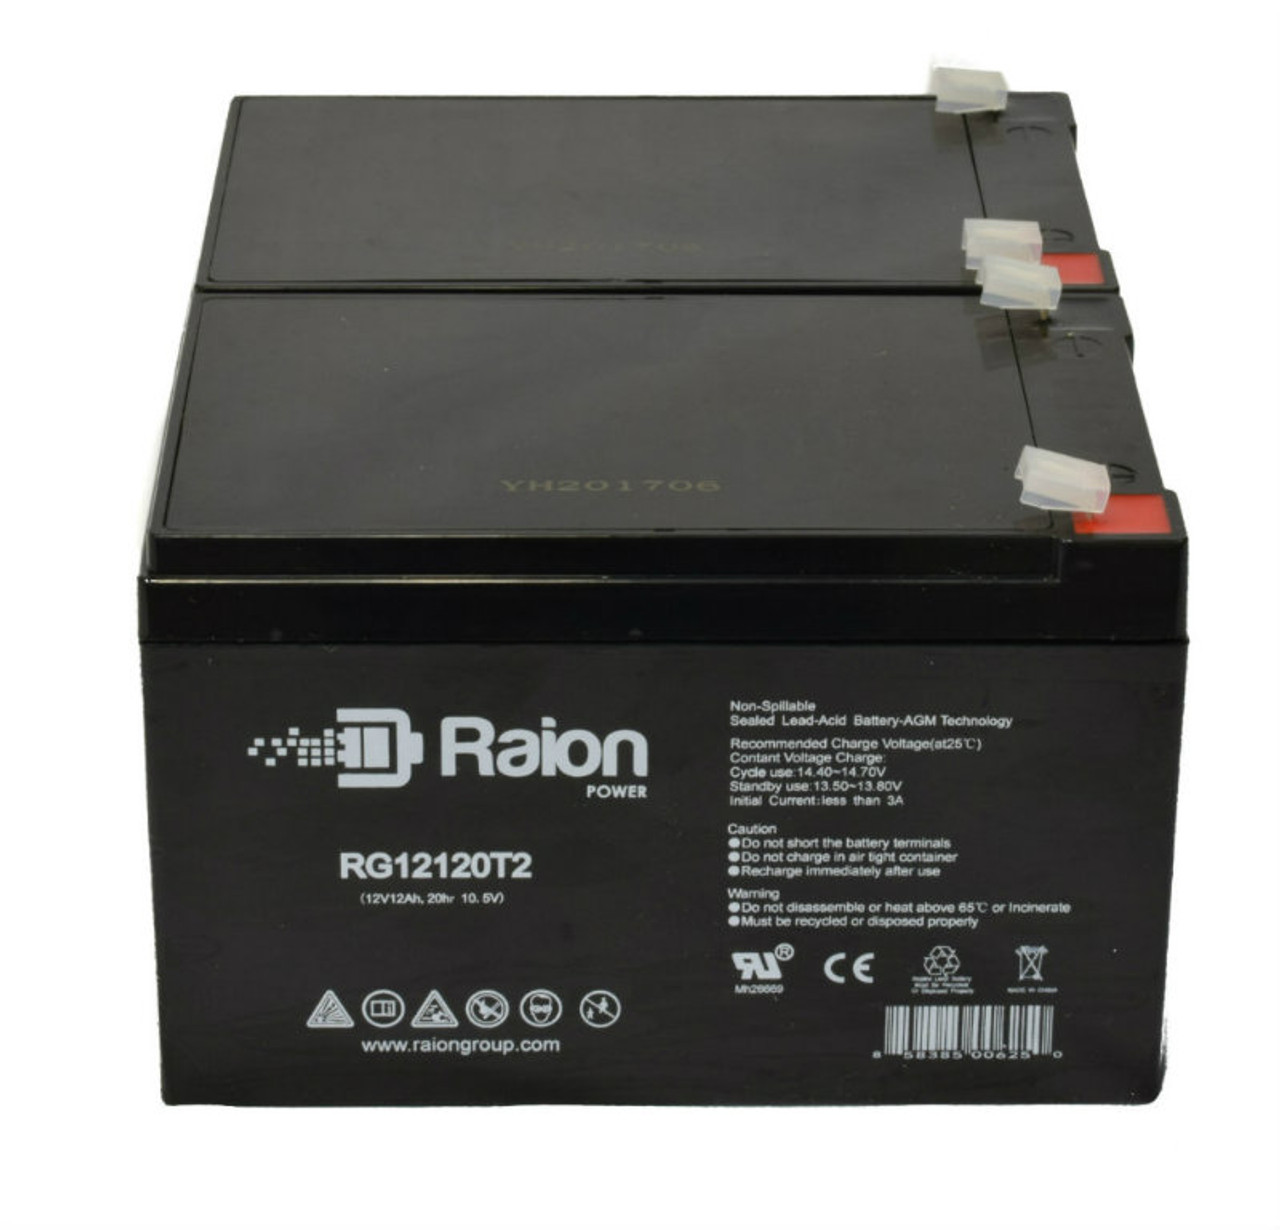 Raion Power RG12120T2 Replacement Battery Set for Electric Mobility Rascal 115 Mobility Scooter - 2 Pack